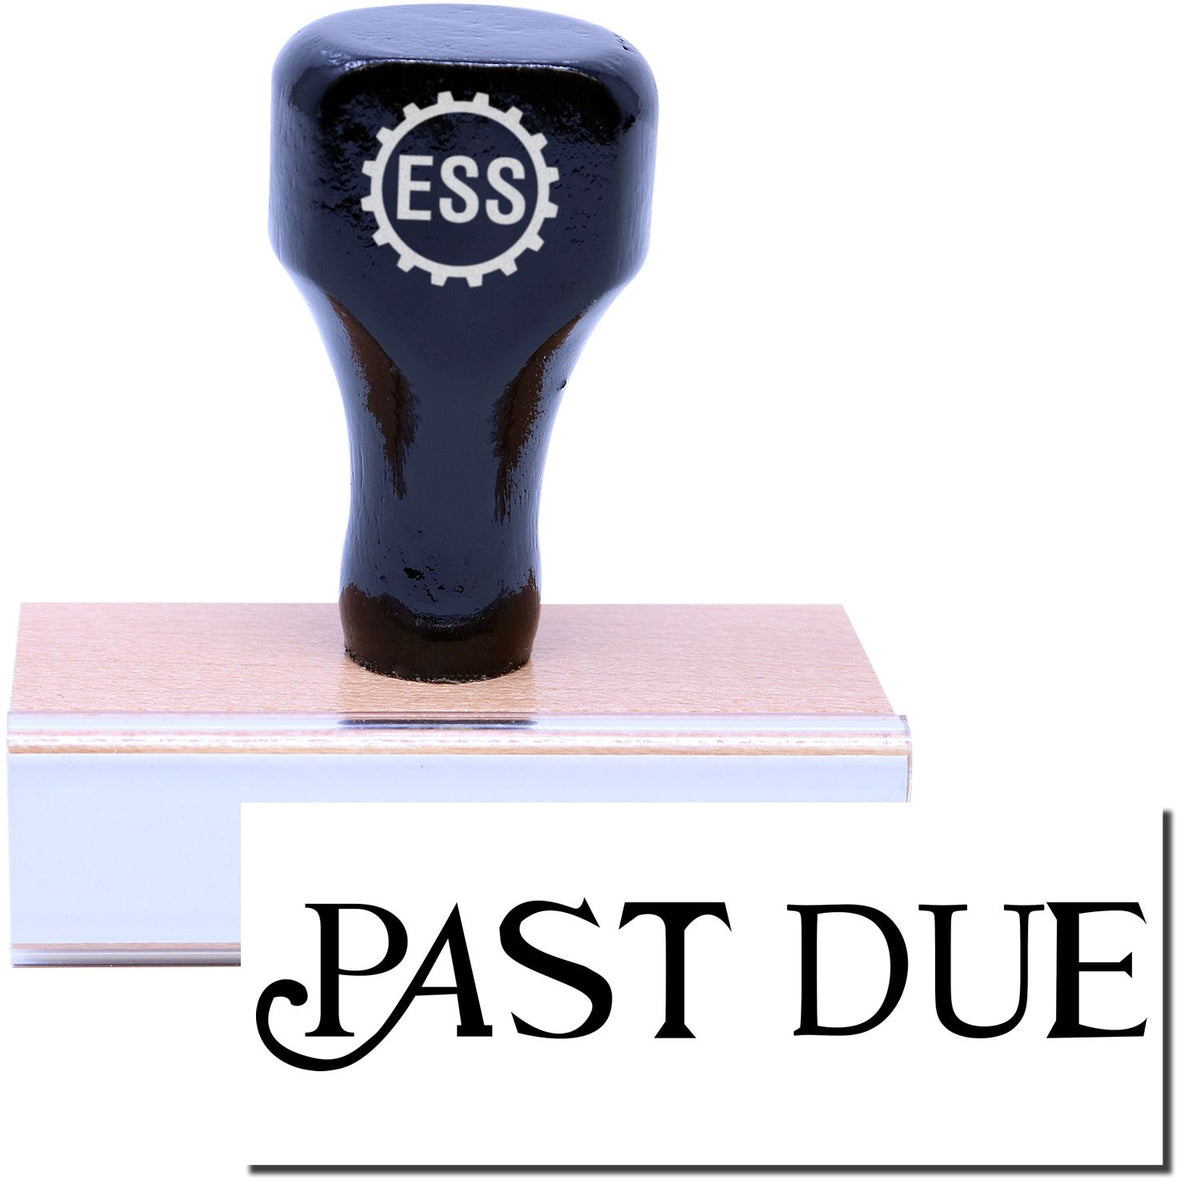 A stock office rubber stamp with a stamped image showing how the text &quot;PAST DUE&quot; in a curly font is displayed after stamping.